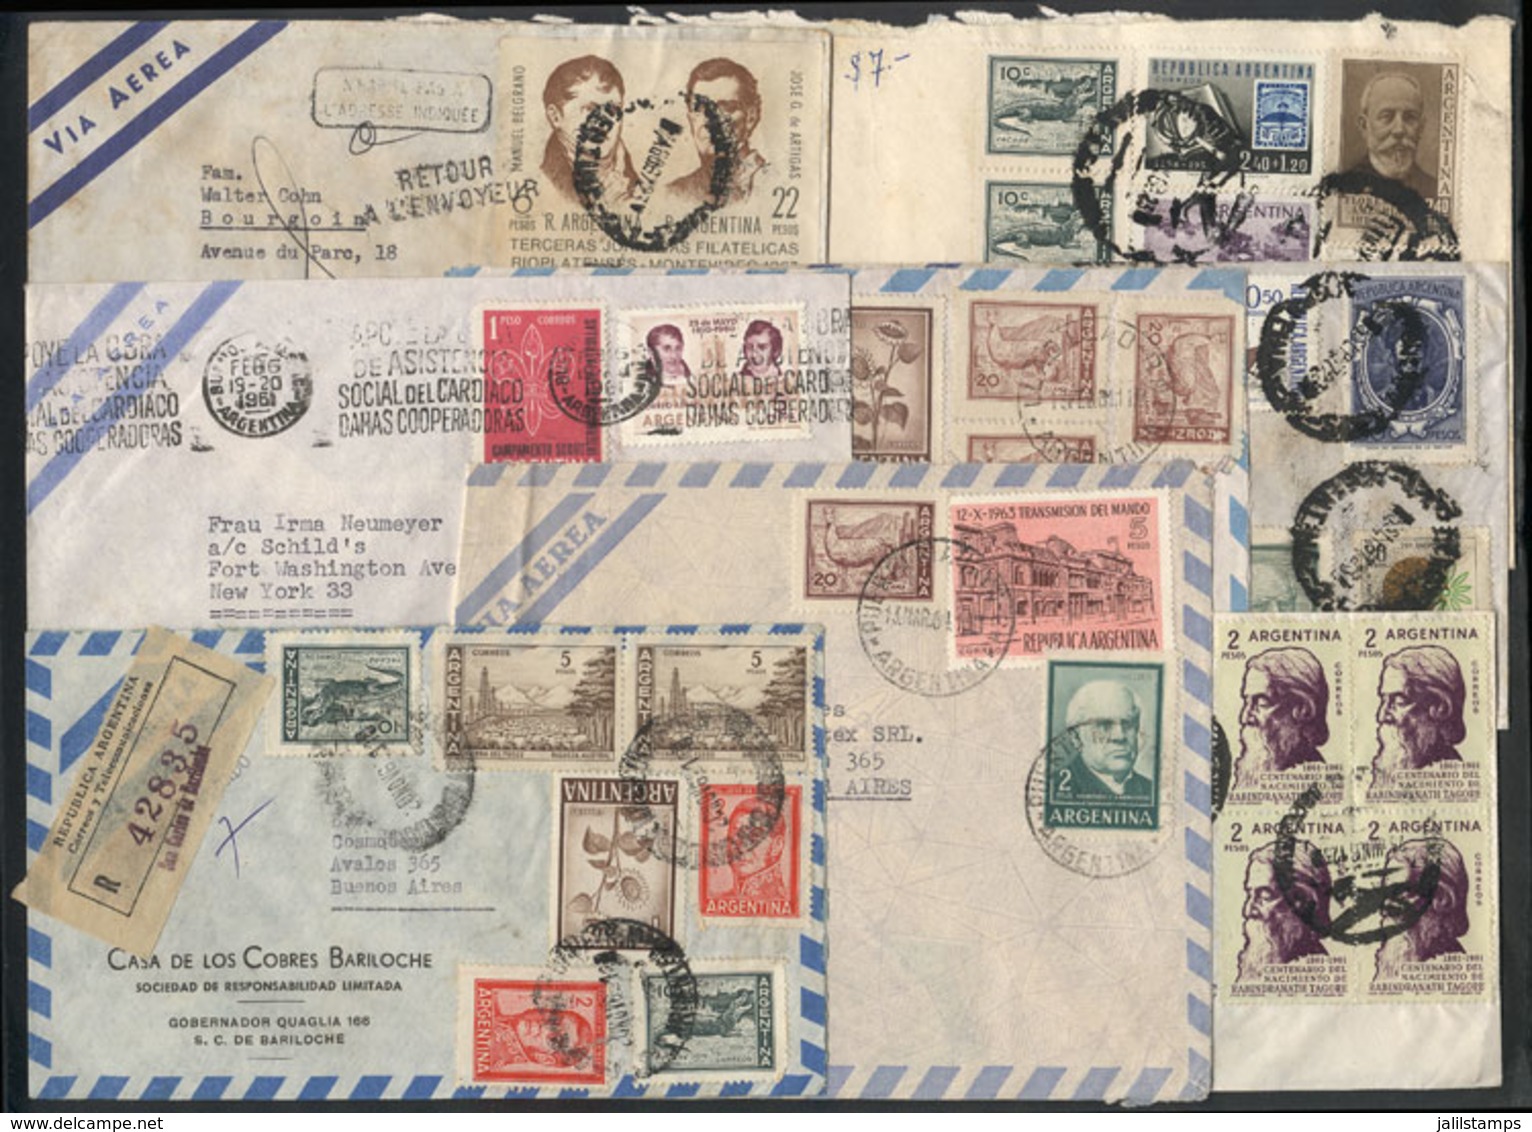 ARGENTINA: 8 Covers Used In 1960s, There Is A Wide Range Of Rates And Postage Combinations, Destinations, Etc., Very Int - Prefilatelia